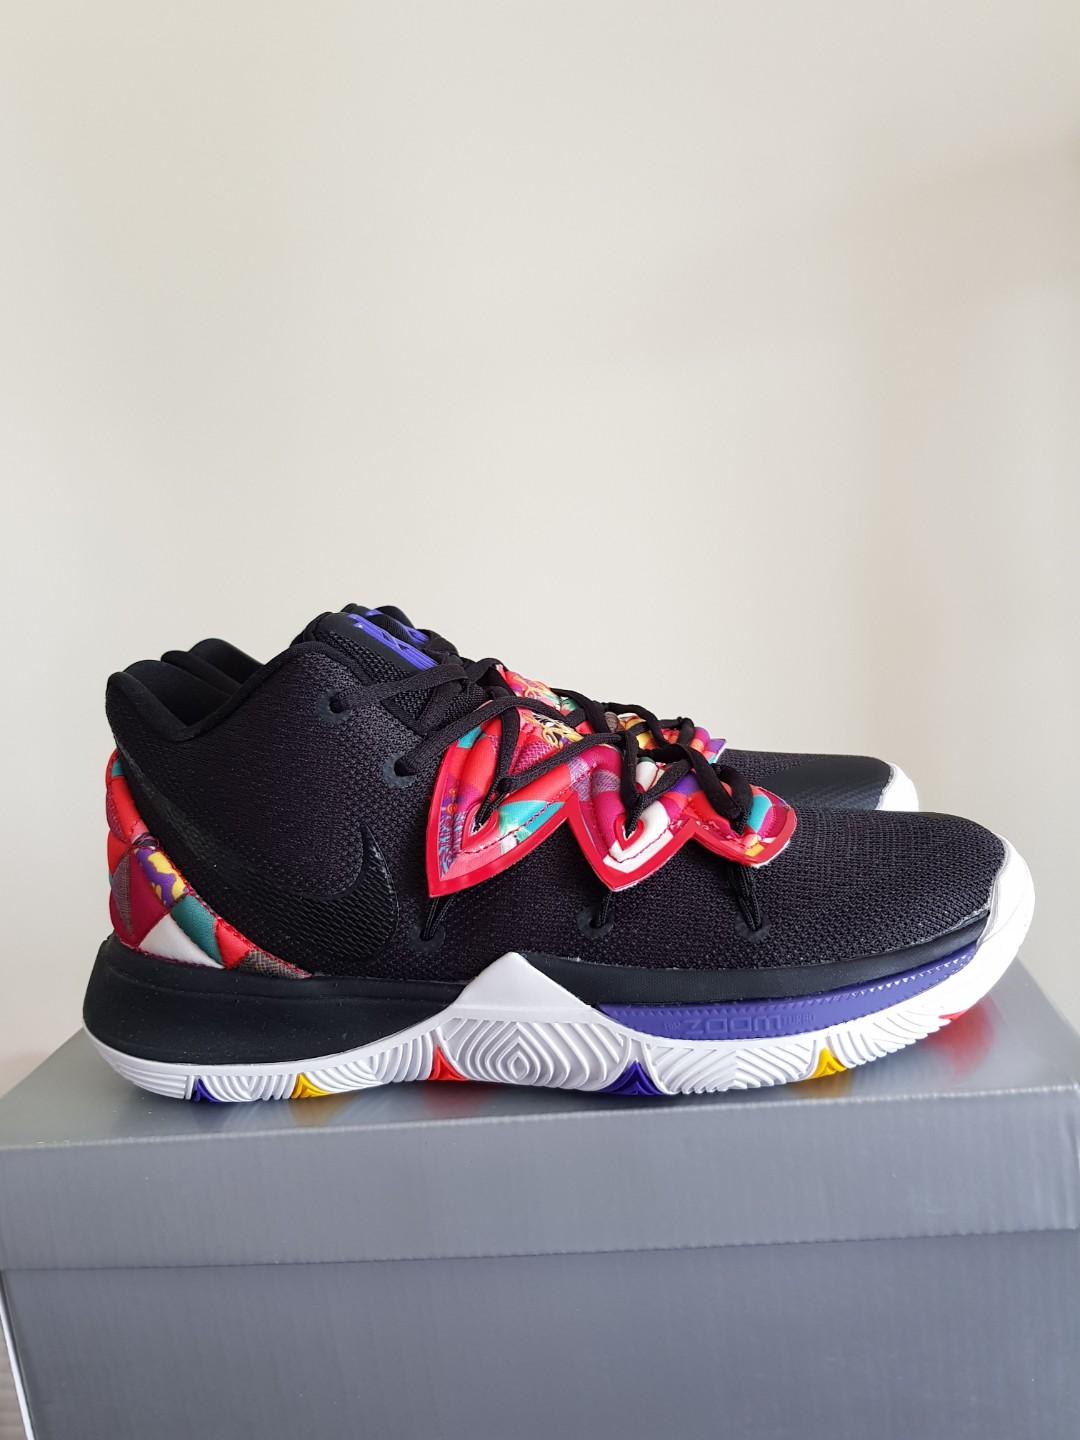 KICKZ LAB.com Kyrie 5 PineApple House is available at Nike on the third floor of Mong Kok